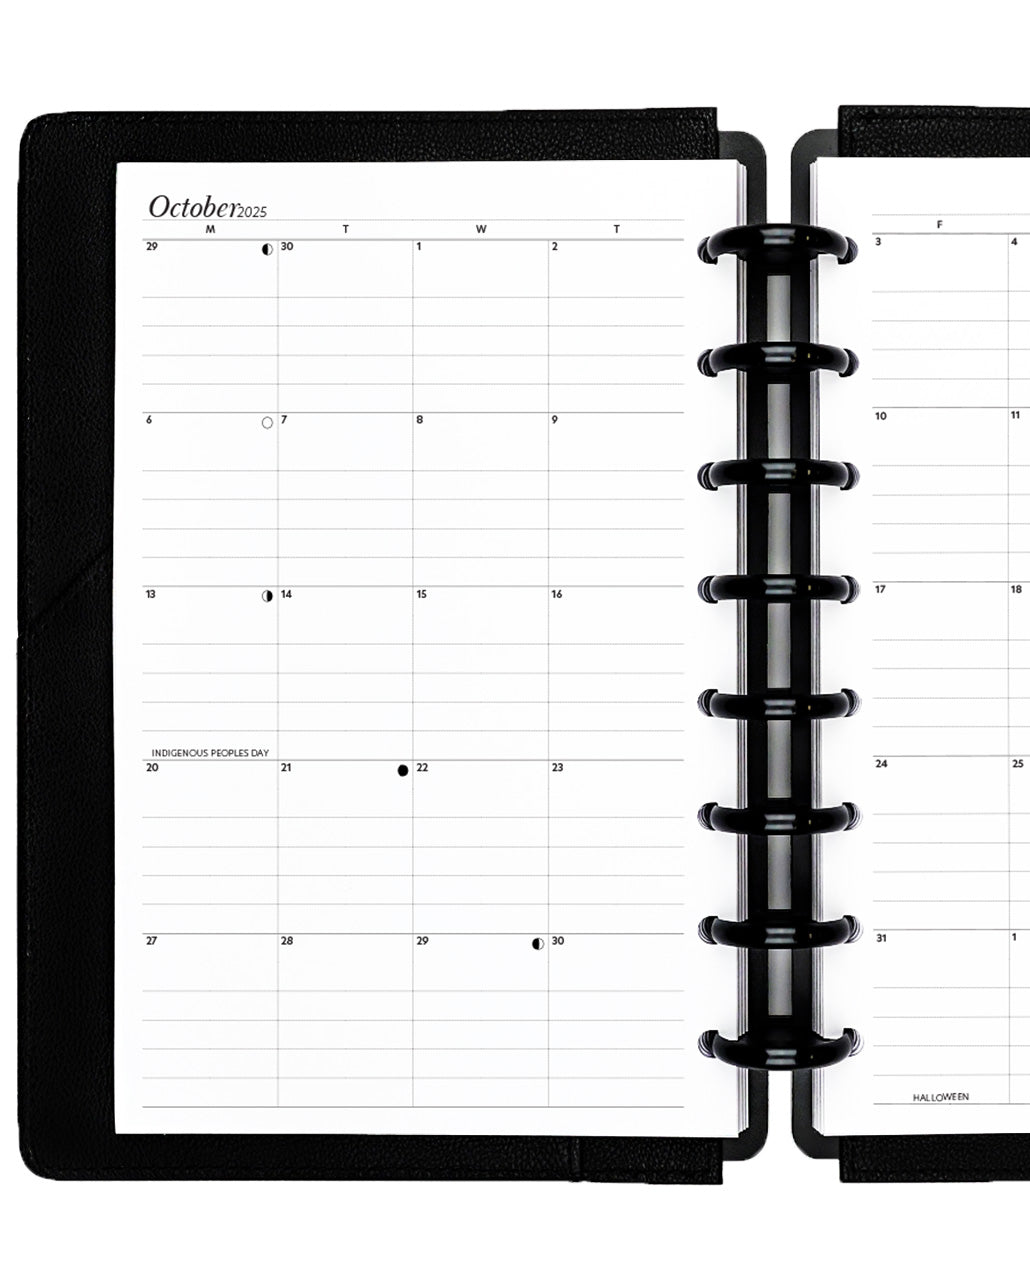 Monthly calendar planner inserts and refill pages for a discbound planner, disc notebook, and ring bound six ring planner system by Jane's agenda.